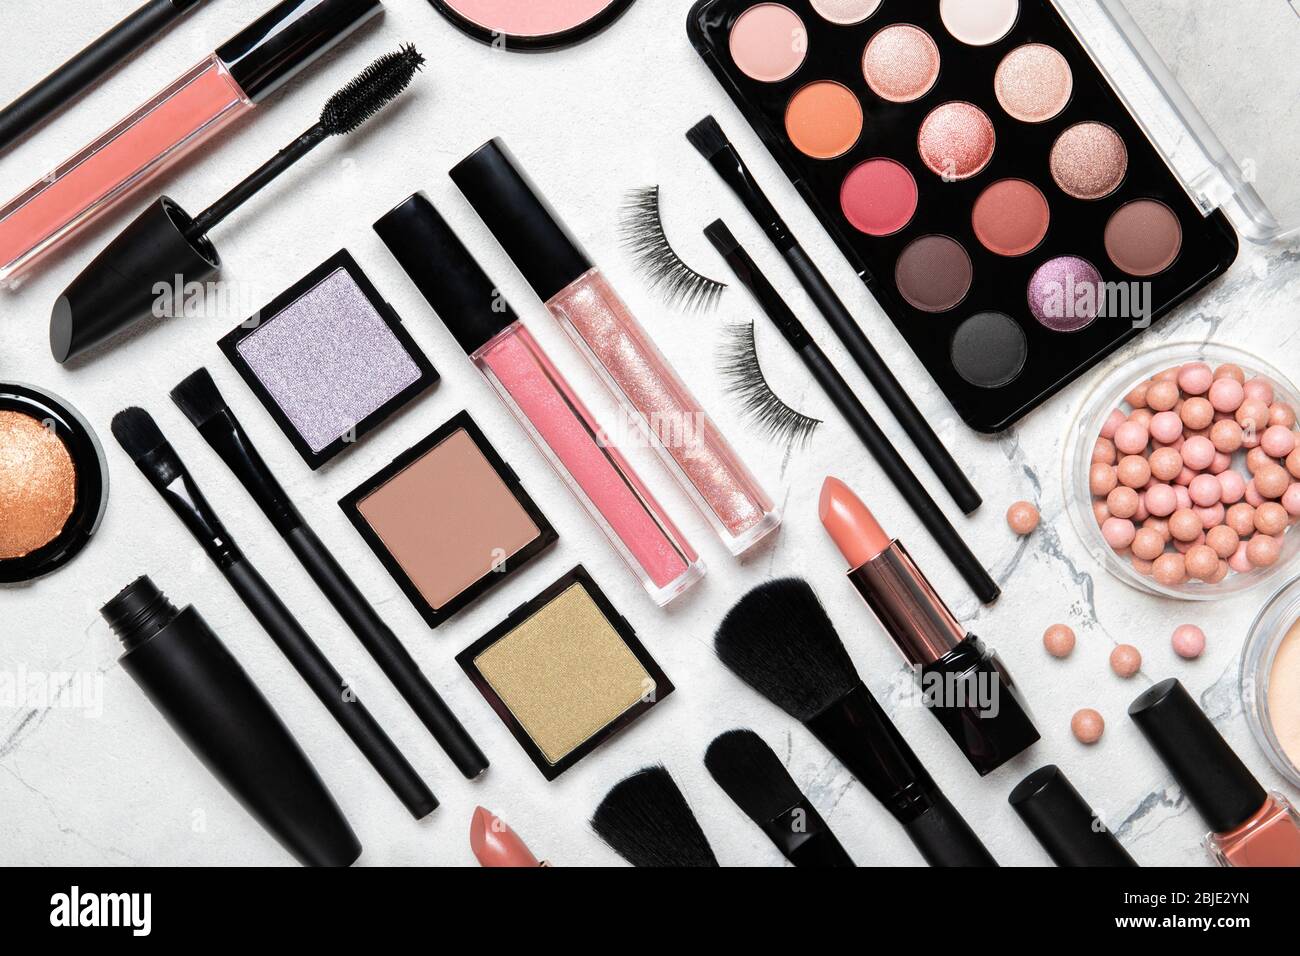 Professional makeup brushes and tools, make-up products set Stock Photo